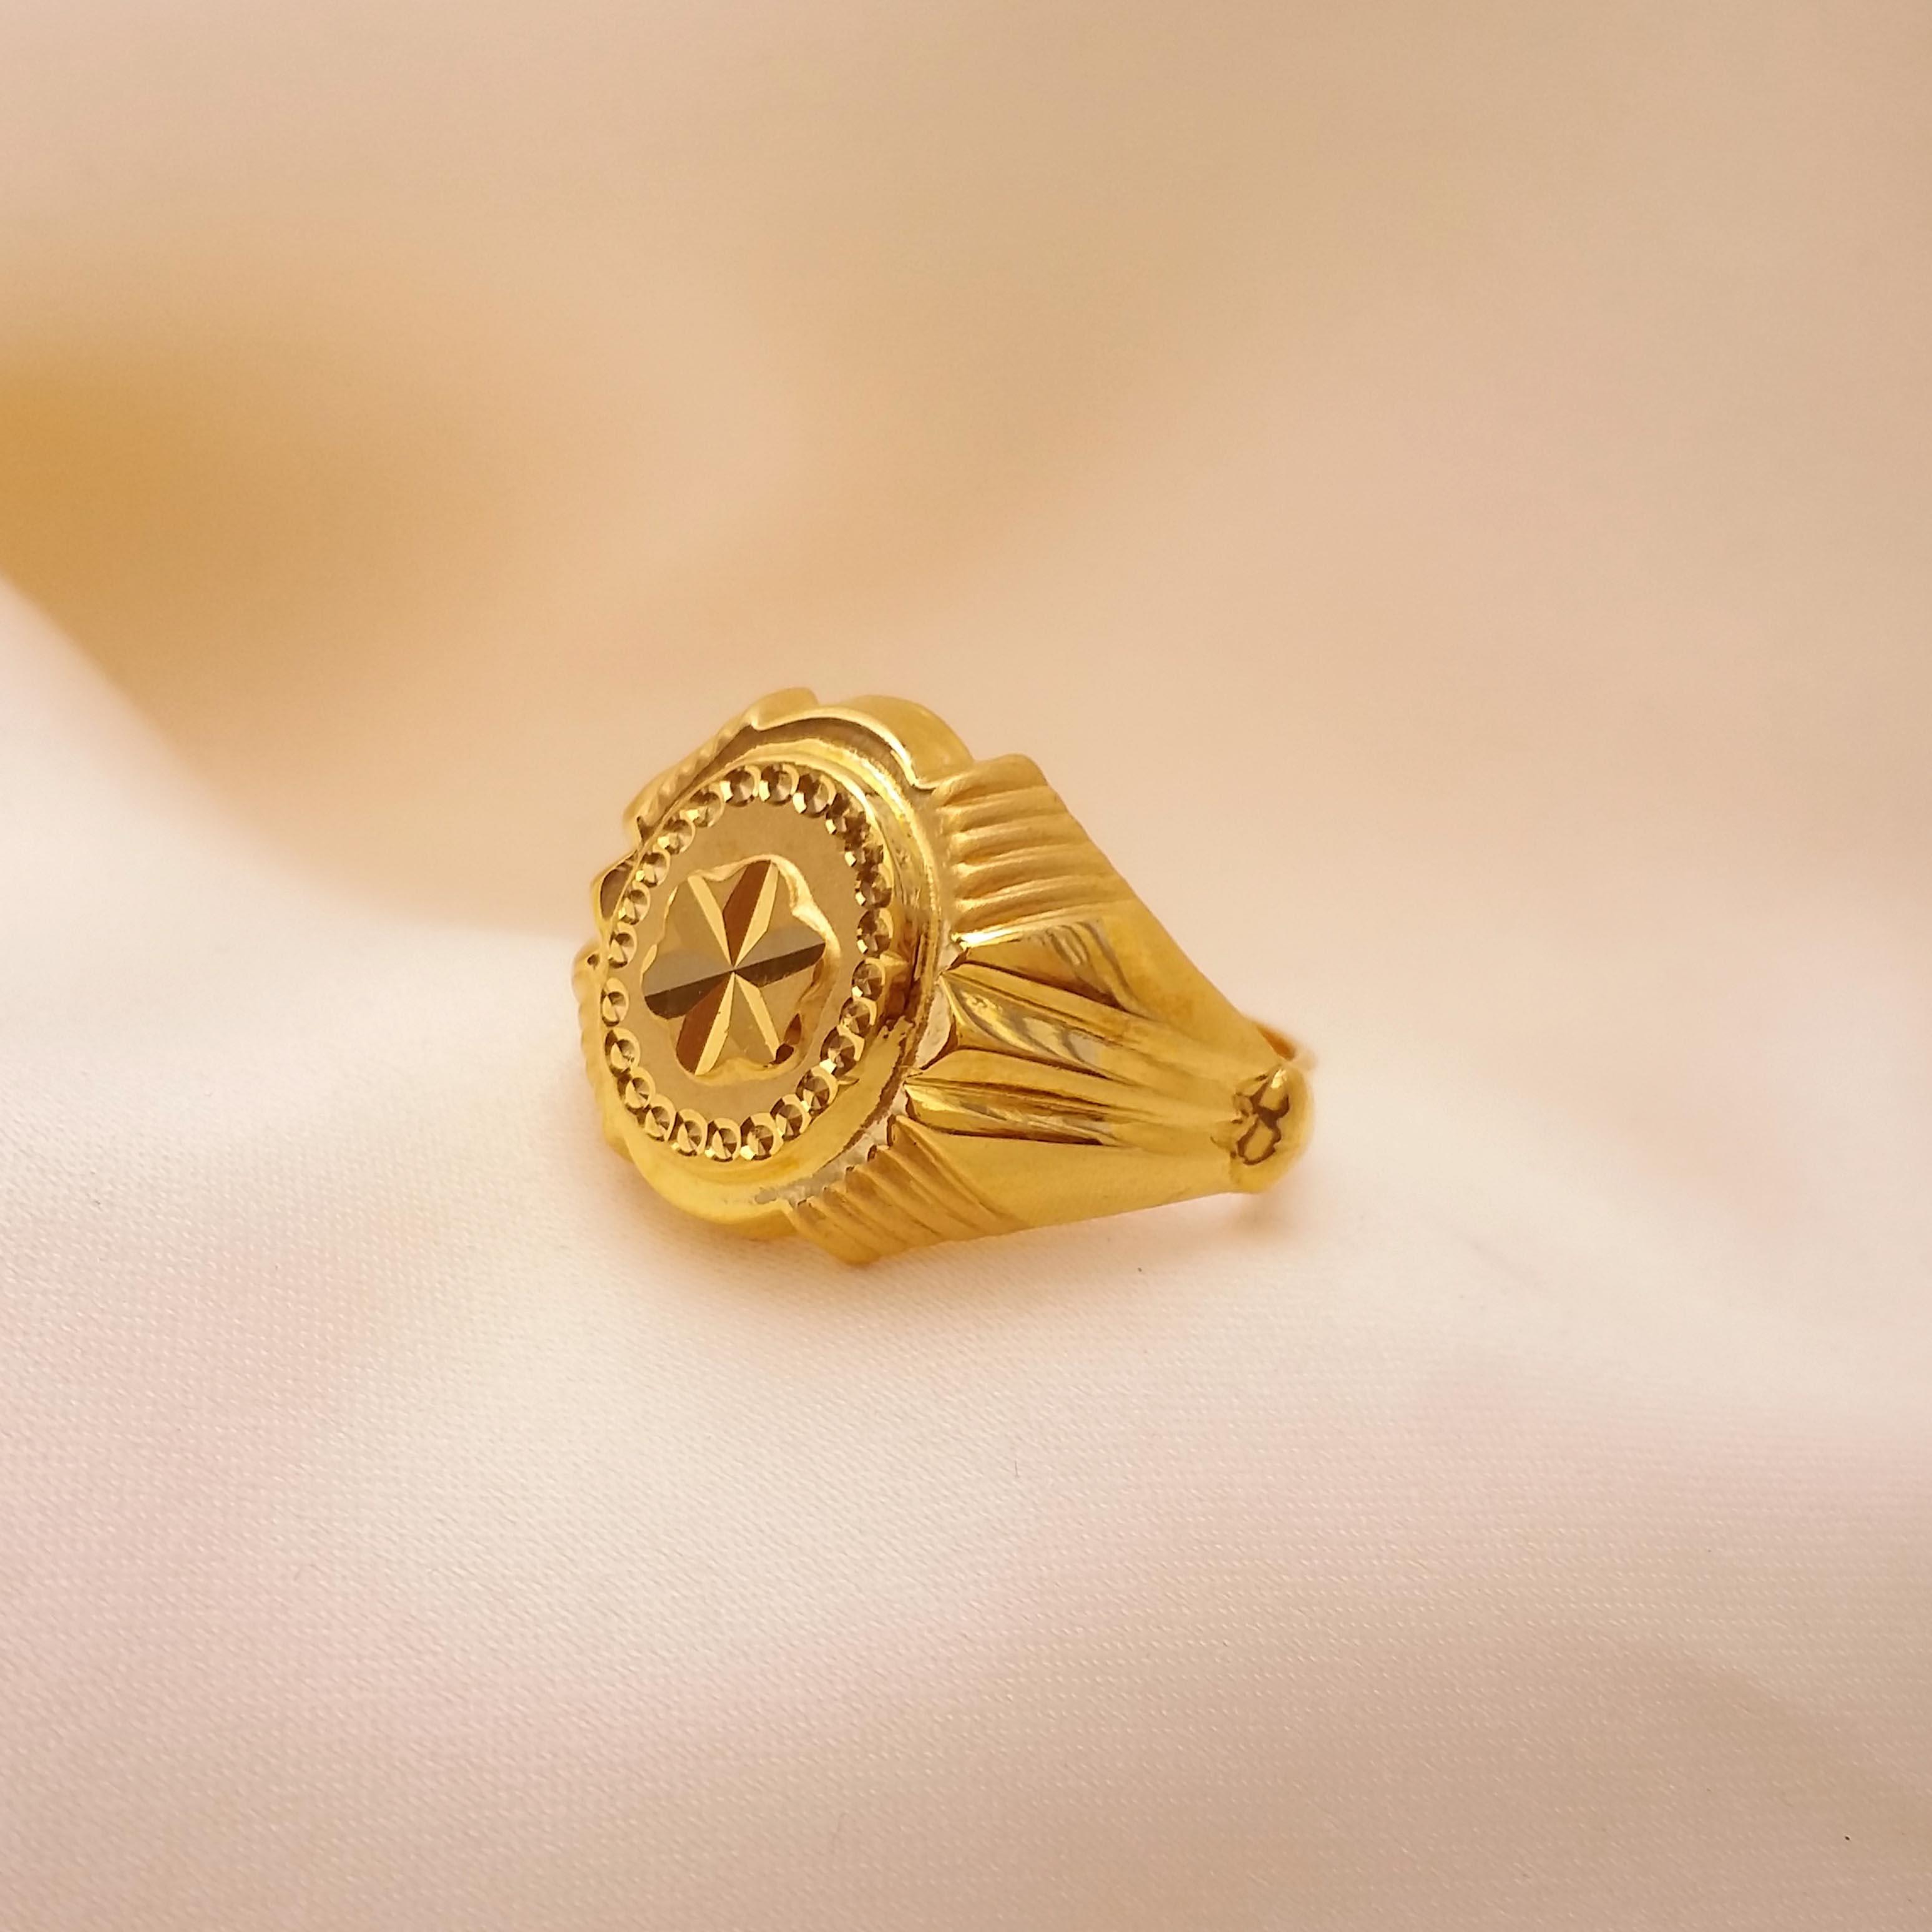 Infinity Spiral Ring in 22k gold – Greek Island House